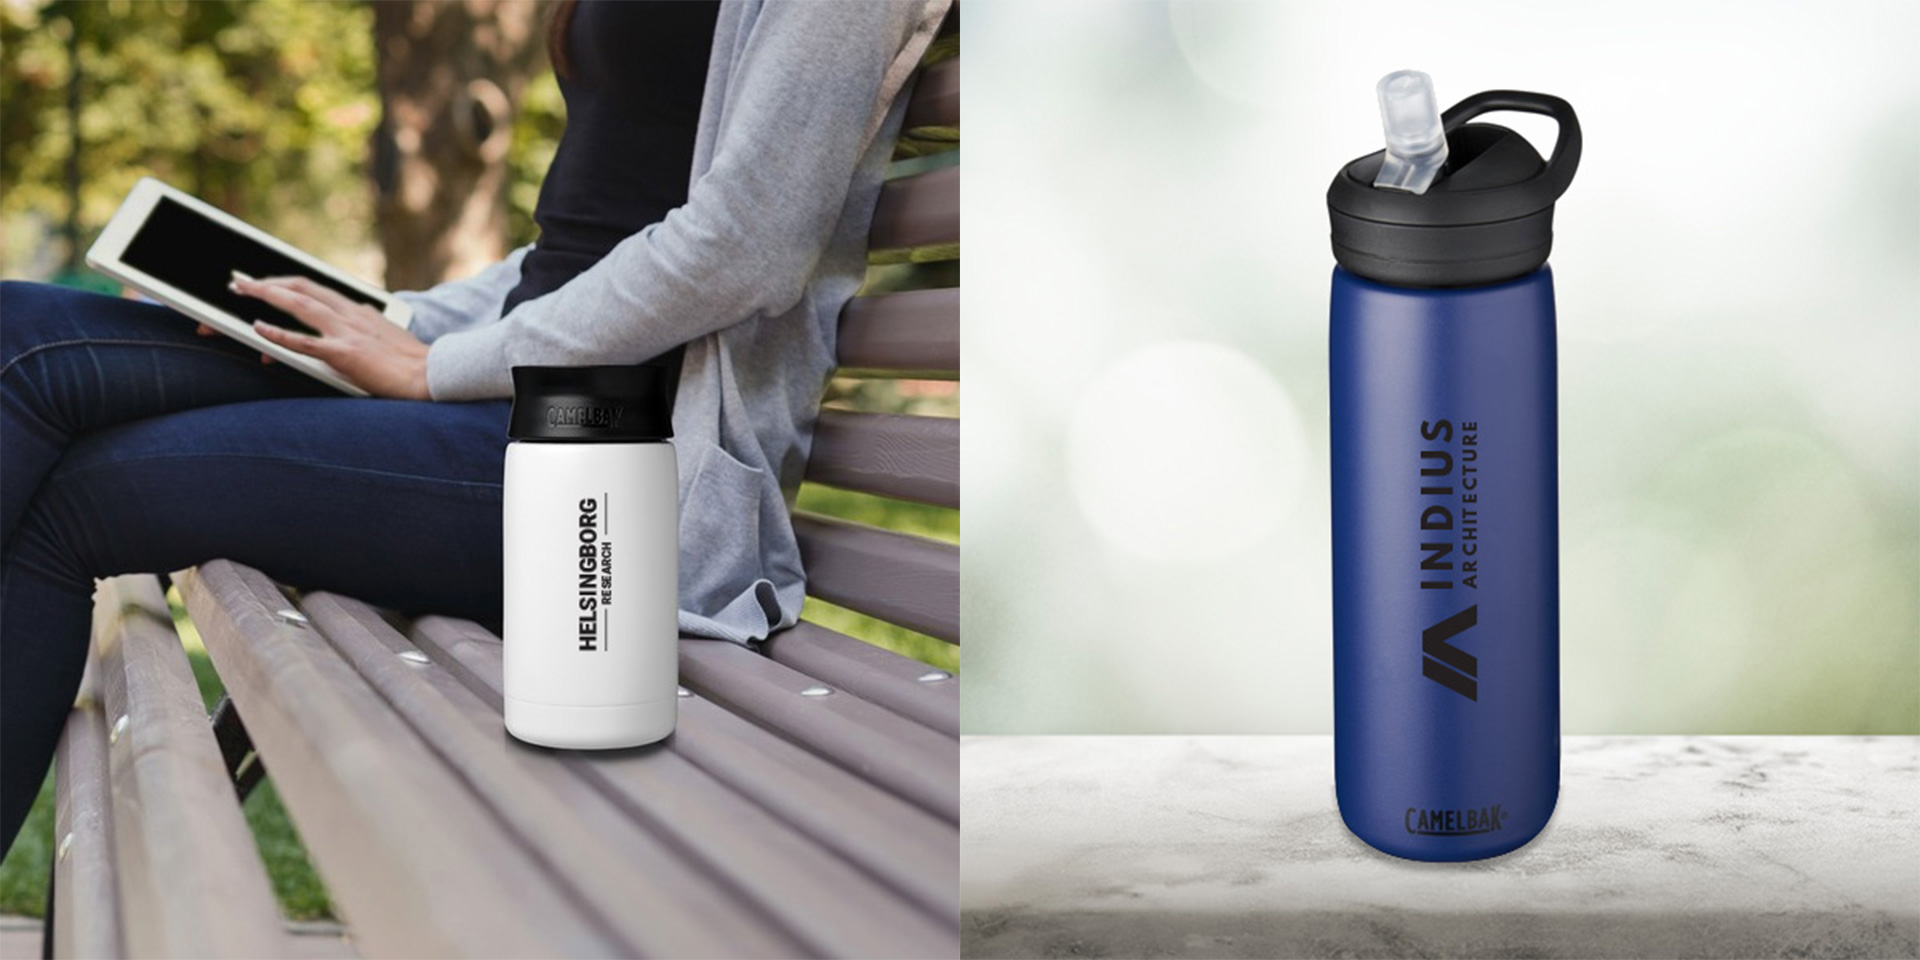 Promotional Products Blog Issue 69 - CamelBak Bottles